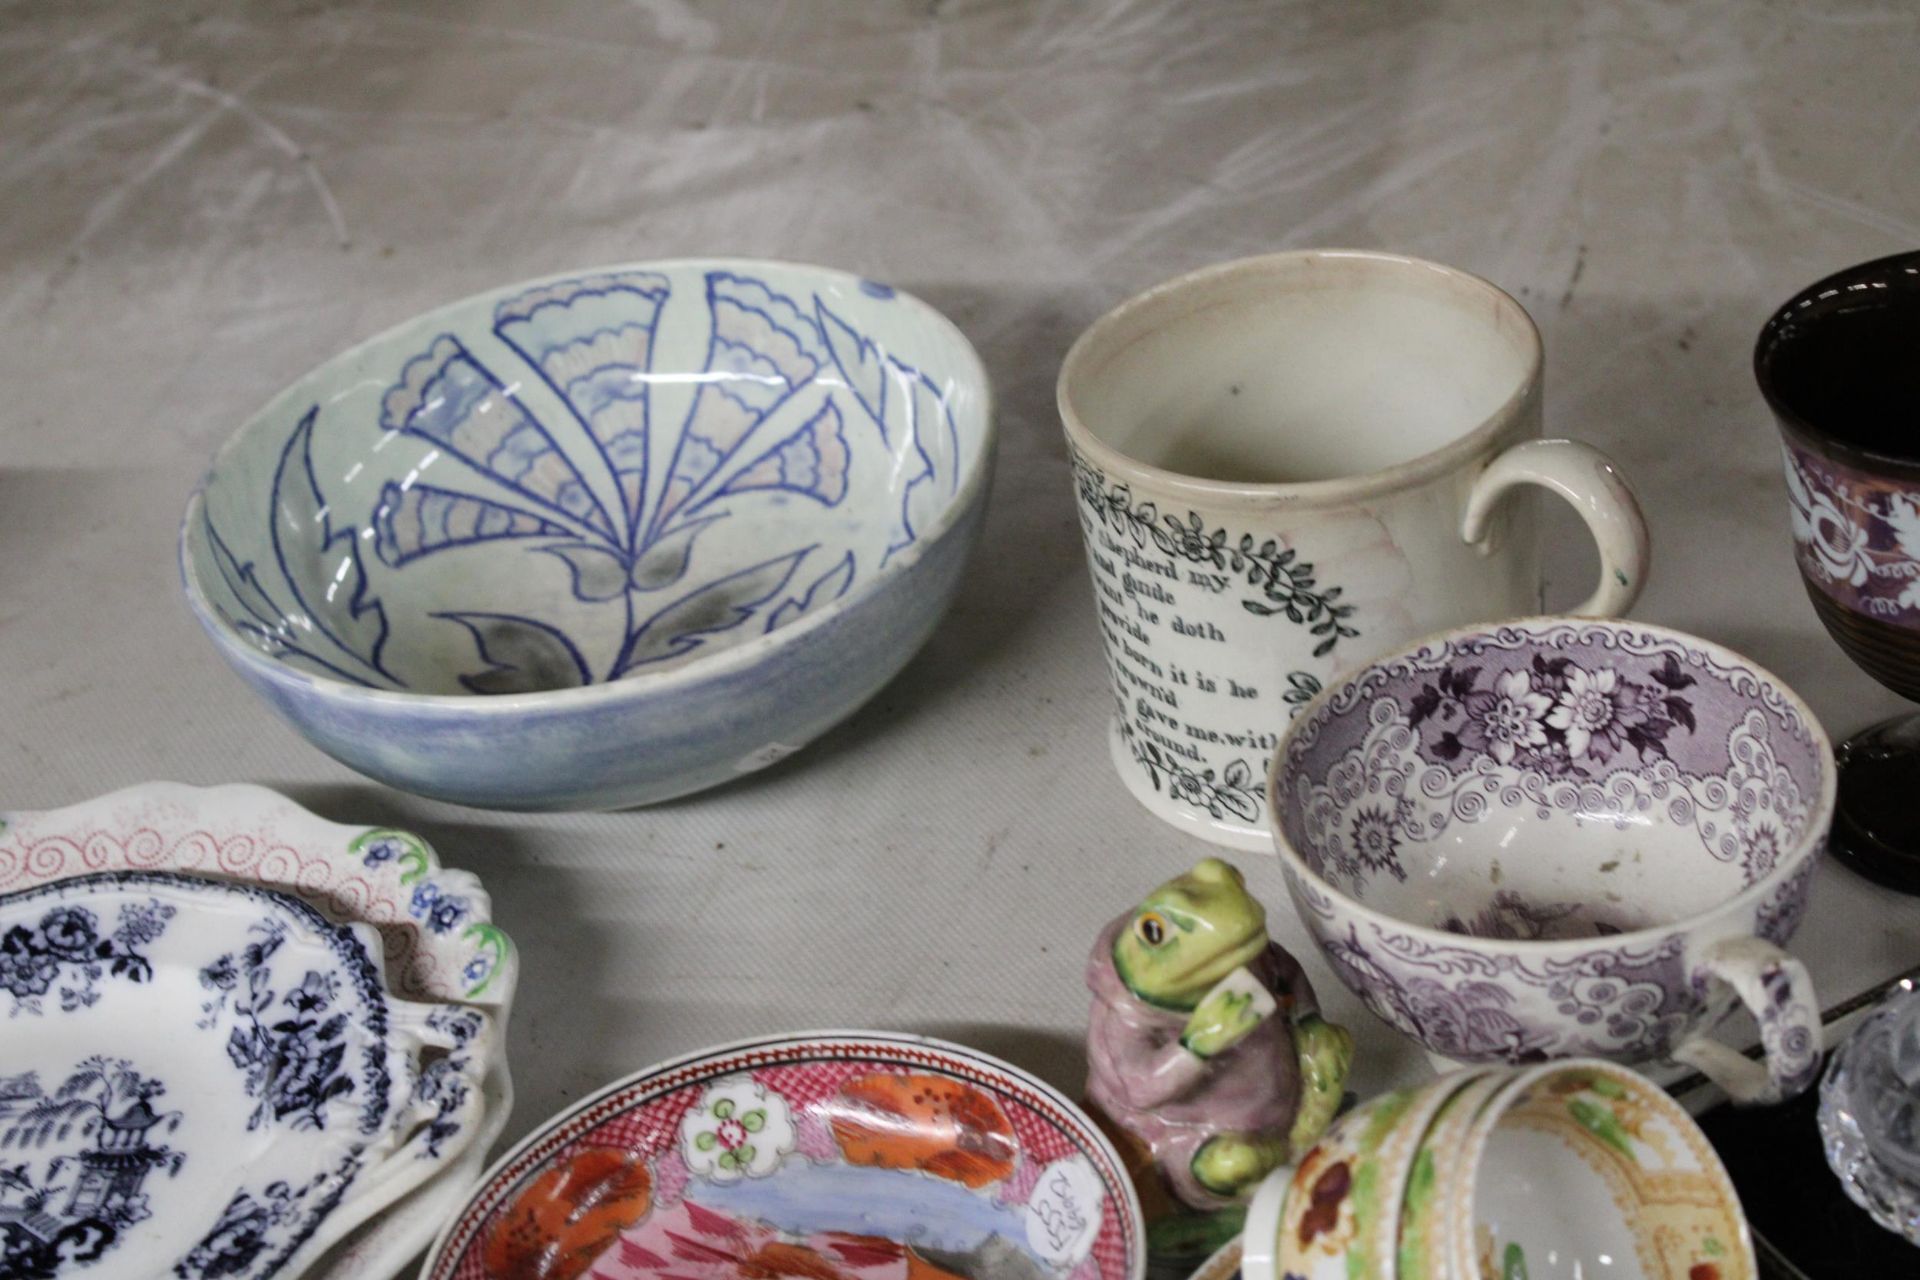 A MIXED LOT OF VINTAGE CERAMICS TO INCLUDE ORIENTAL DISHES, A FRANZ PORCELAIN CUP, CUPS, PLATES, ETC - Image 2 of 3